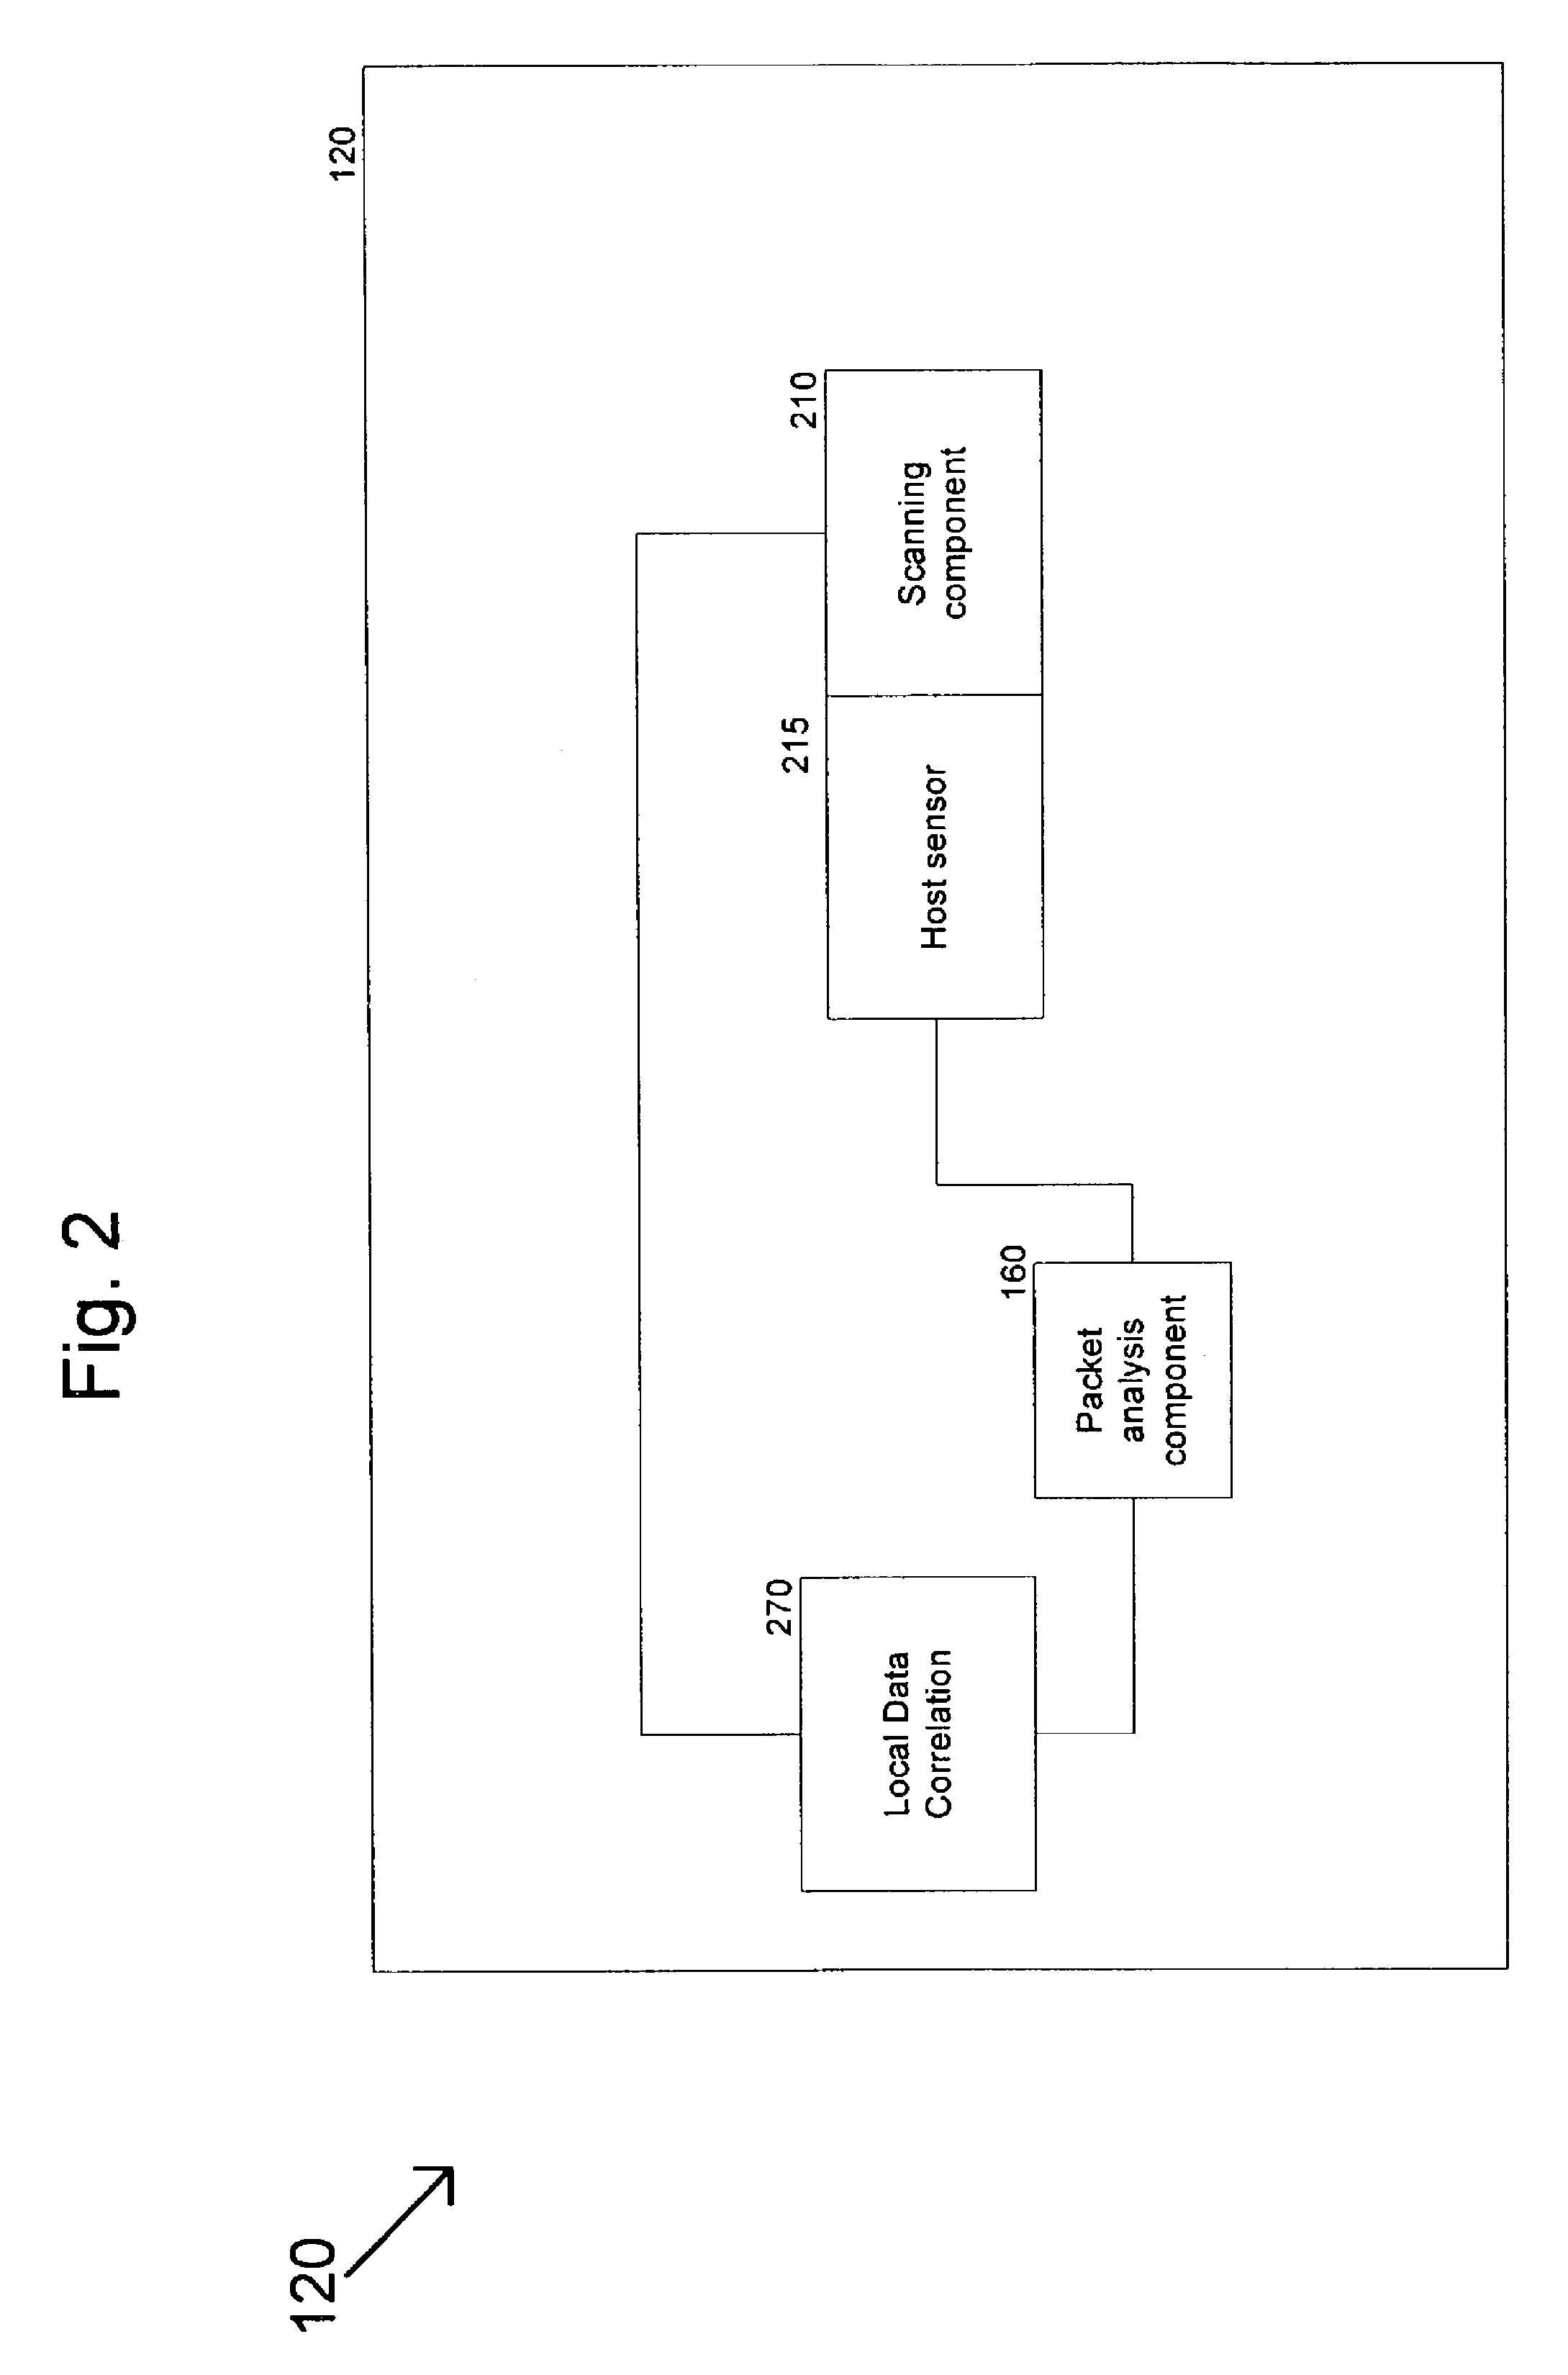 Method and system for dynamically protecting a computer system from attack